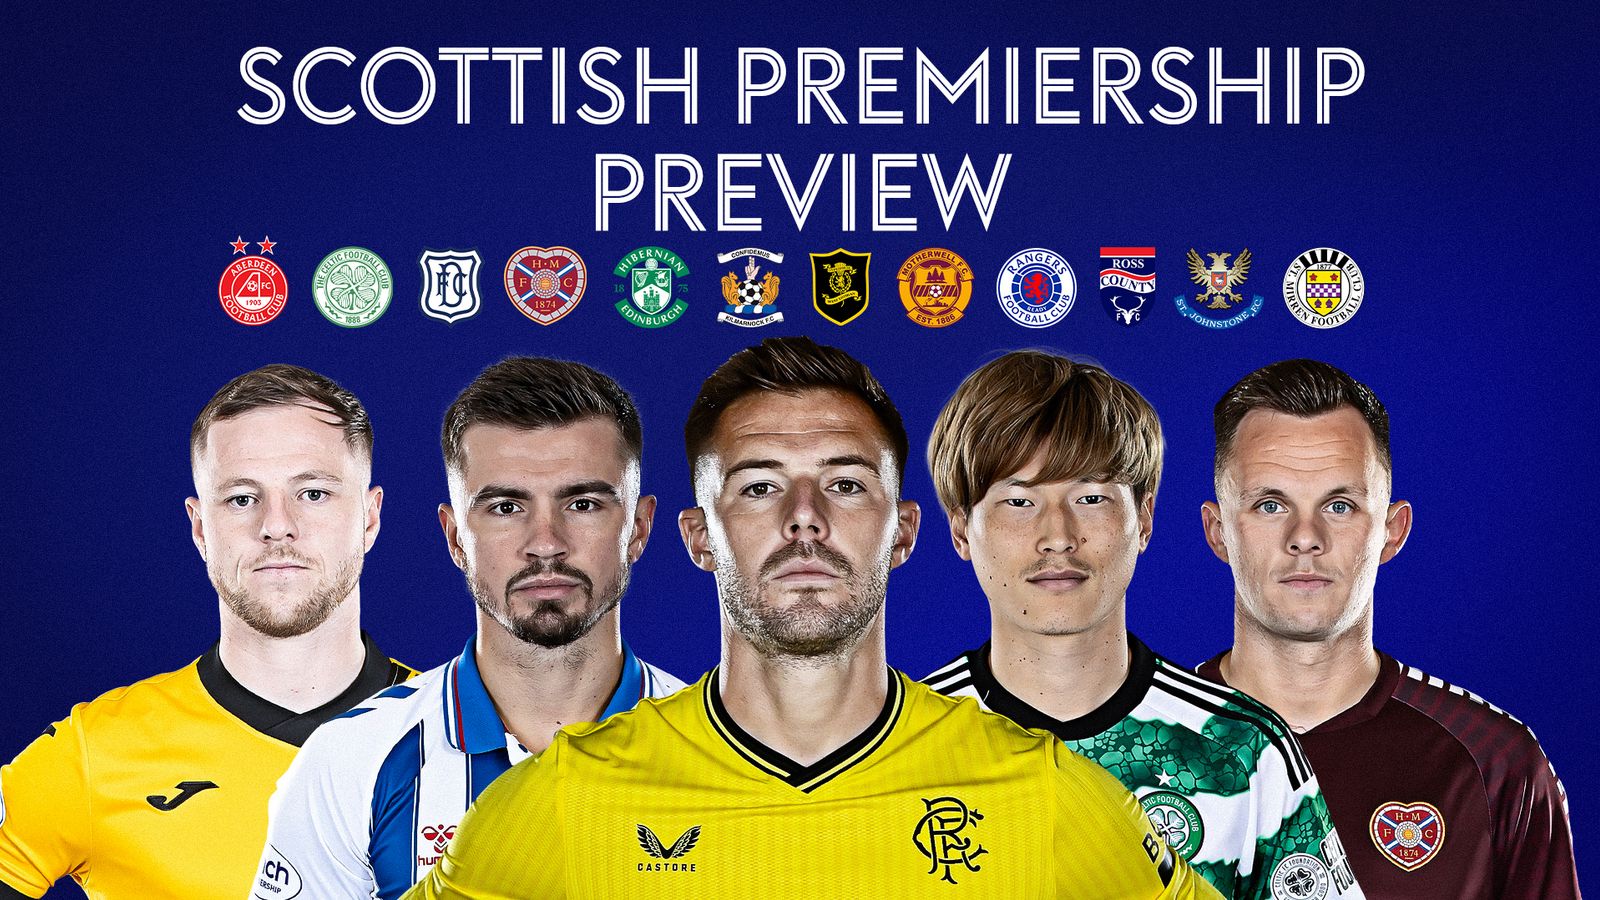 Scottish Premiership: Rangers host Kilmarnock on Sky, Celtic face Hearts in title race; Livingston at Motherwell in bid to stay up